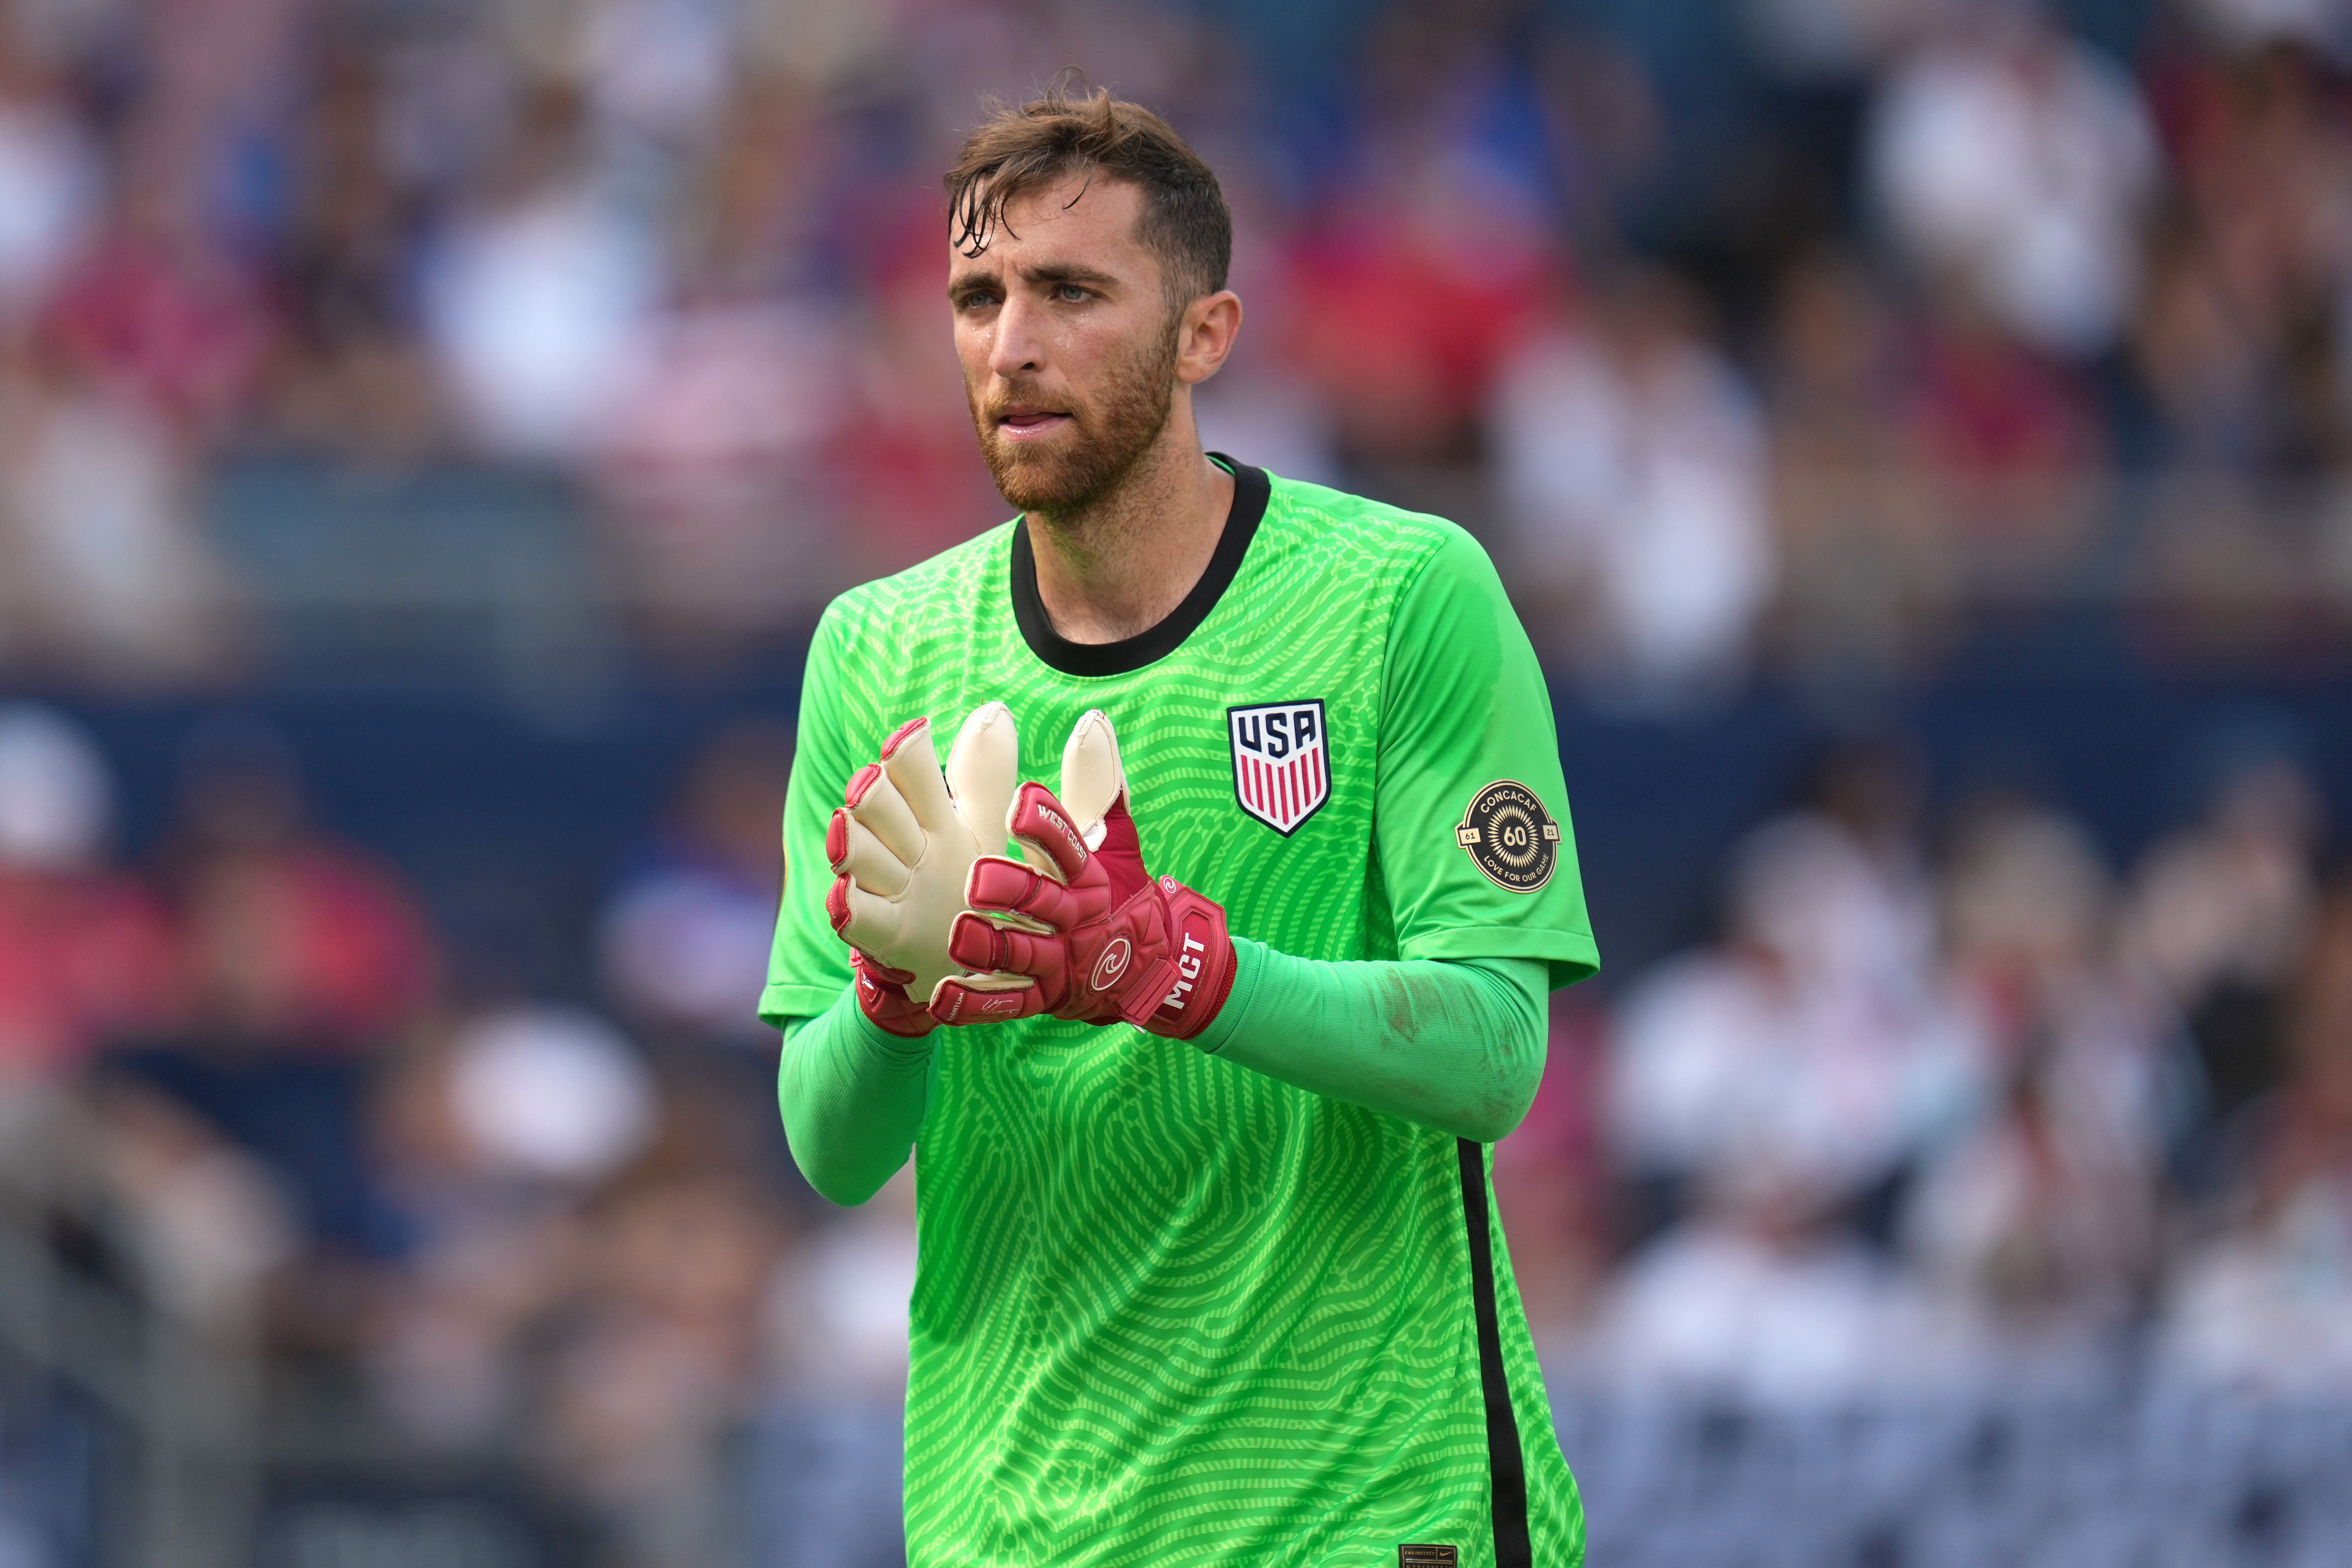 SOCCER: JUL 18 Concacaf Gold Cup - USA v Canada